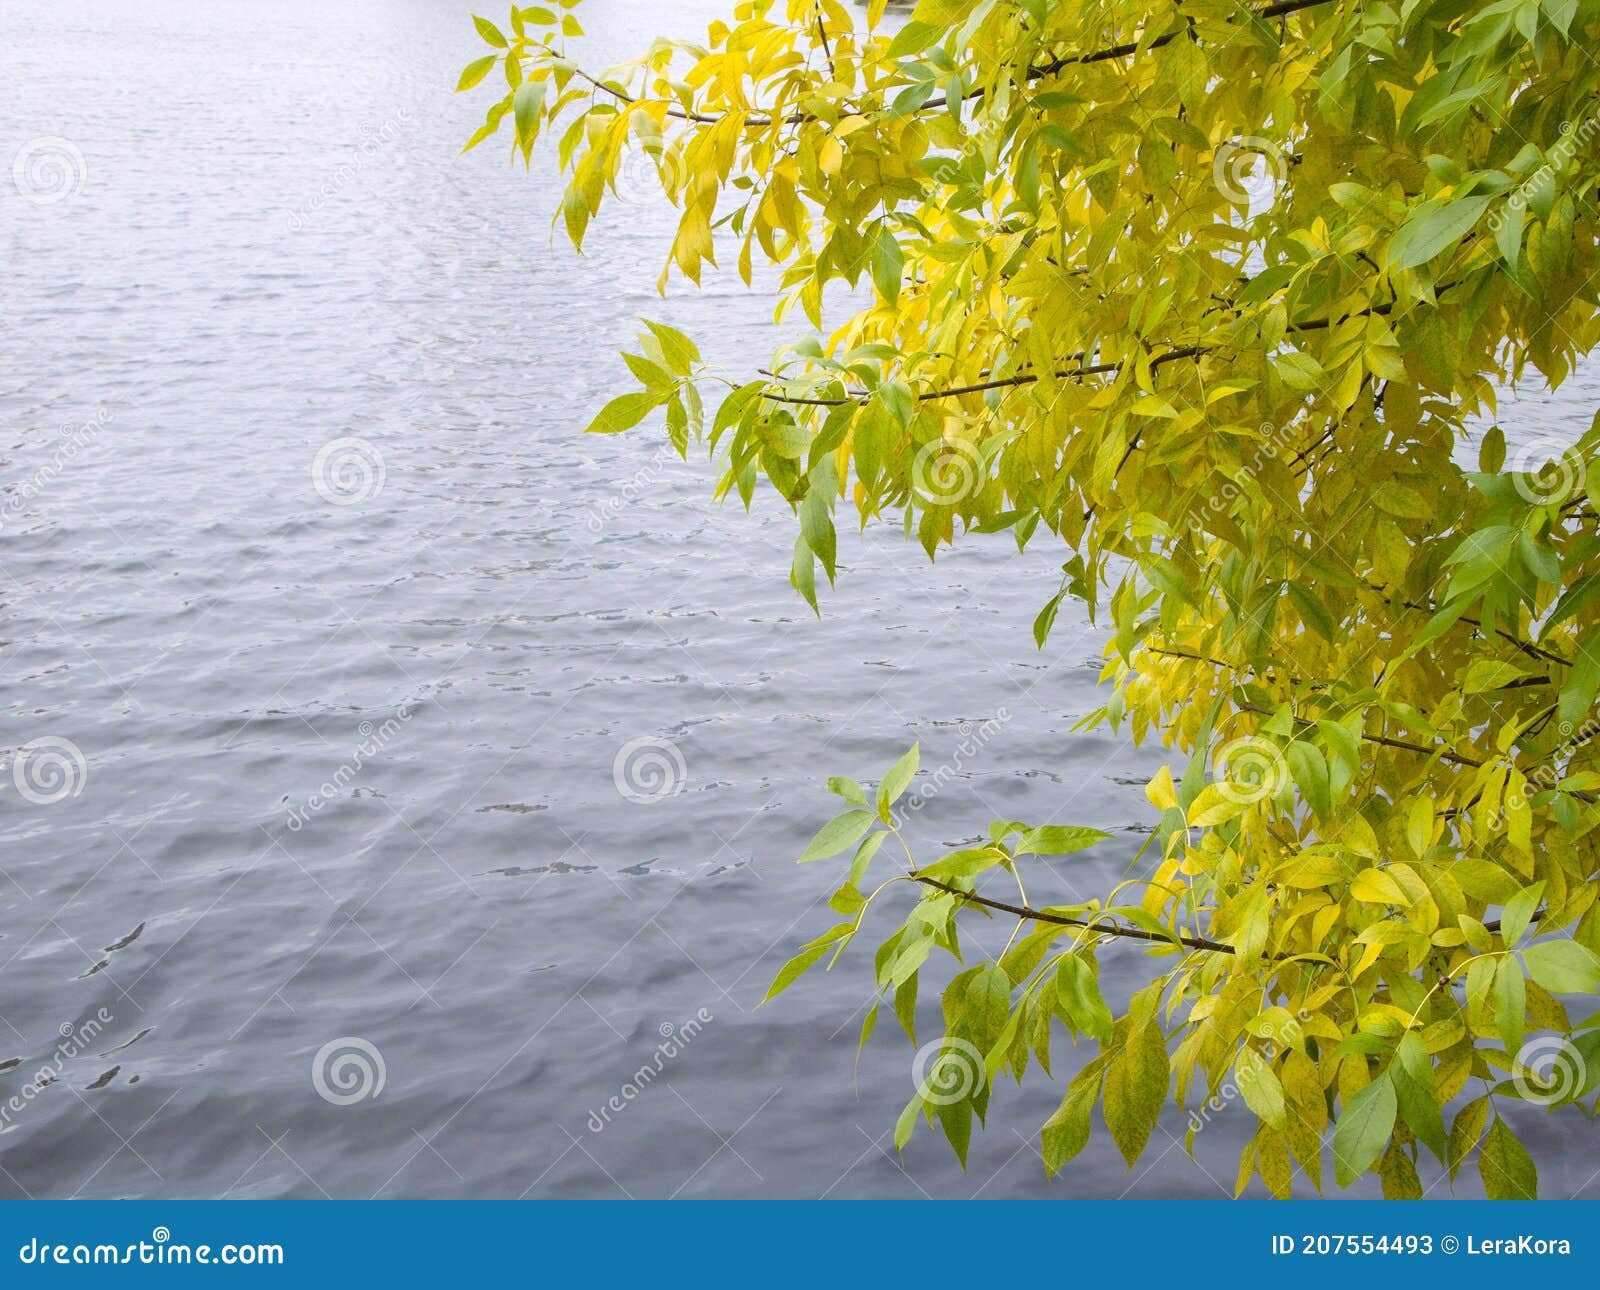 Yellowing Foliage On The Branches Of A Tree That Bent Over A Calm River